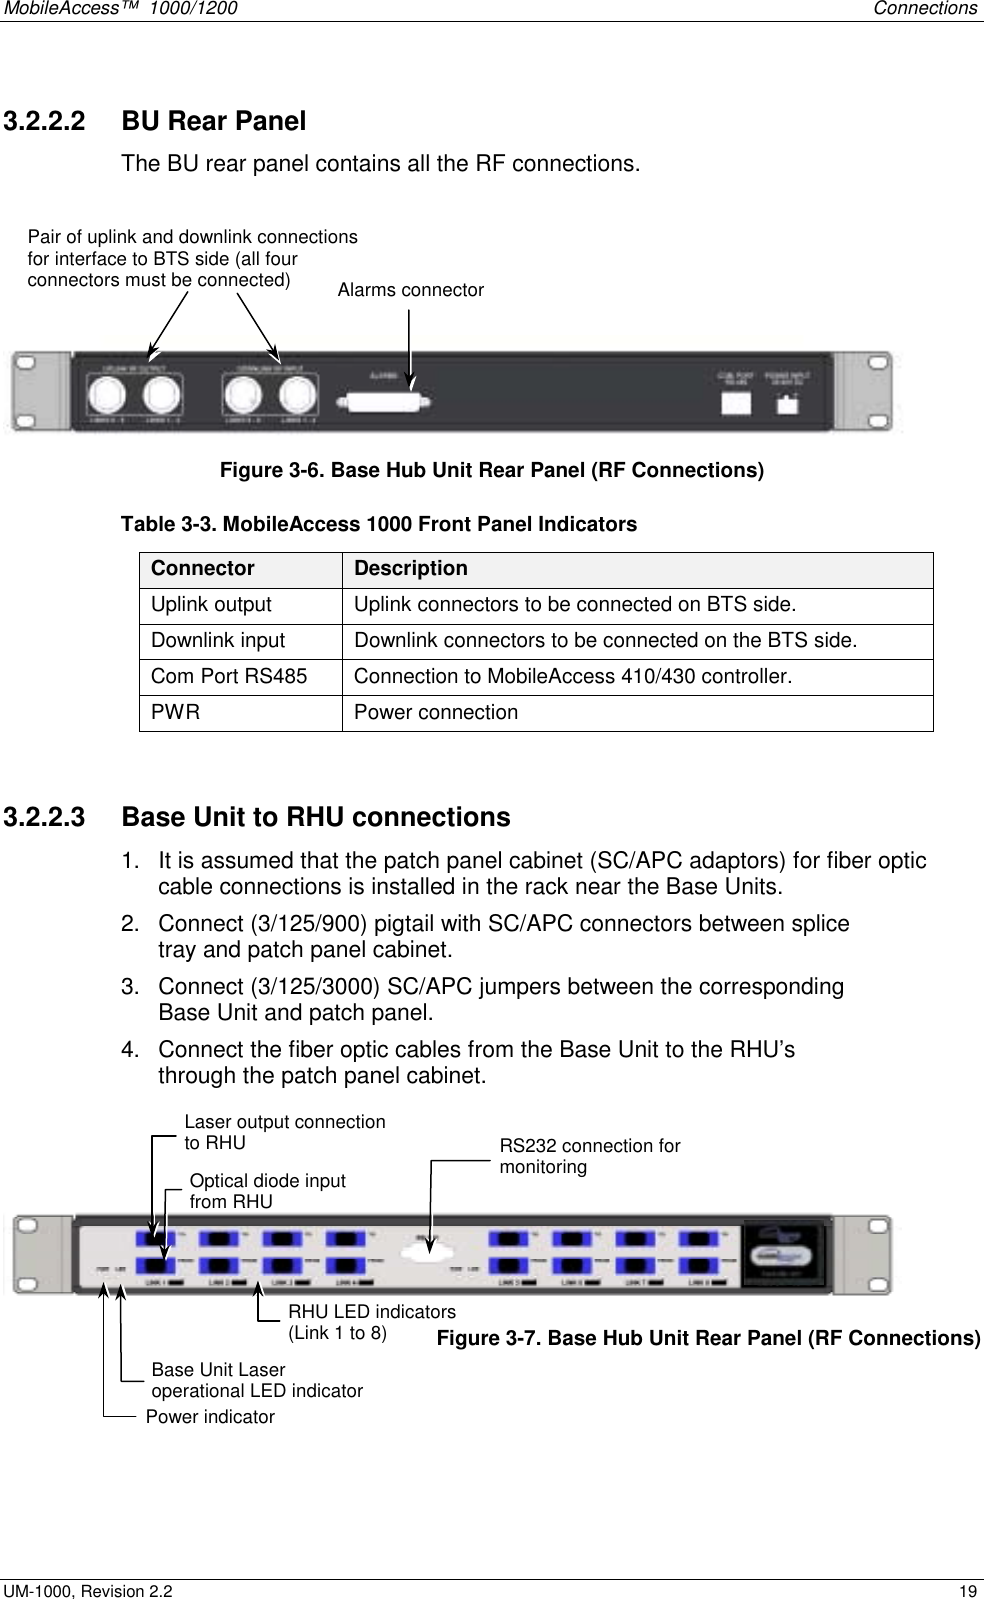 MobileAccess™  1000/1200    Connections  UM-1000, Revision 2.2    19 3.2.2.2   BU Rear Panel The BU rear panel contains all the RF connections.      Figure  3-6. Base Hub Unit Rear Panel (RF Connections) Table  3-3. MobileAccess 1000 Front Panel Indicators Connector  Description Uplink output  Uplink connectors to be connected on BTS side. Downlink input  Downlink connectors to be connected on the BTS side.  Com Port RS485  Connection to MobileAccess 410/430 controller.  PWR   Power connection  3.2.2.3   Base Unit to RHU connections 1.  It is assumed that the patch panel cabinet (SC/APC adaptors) for fiber optic cable connections is installed in the rack near the Base Units.  2.  Connect (3/125/900) pigtail with SC/APC connectors between splice tray and patch panel cabinet.  3.  Connect (3/125/3000) SC/APC jumpers between the corresponding Base Unit and patch panel.  4.  Connect the fiber optic cables from the Base Unit to the RHU’s through the patch panel cabinet.     Figure  3-7. Base Hub Unit Rear Panel (RF Connections)    Laser output connection to RHU Optical diode input from RHU Base Unit Laser operational LED indicator RHU LED indicators (Link 1 to 8) RS232 connection for monitoring Power indicator Pair of uplink and downlink connections for interface to BTS side (all four connectors must be connected)  Alarms connector 